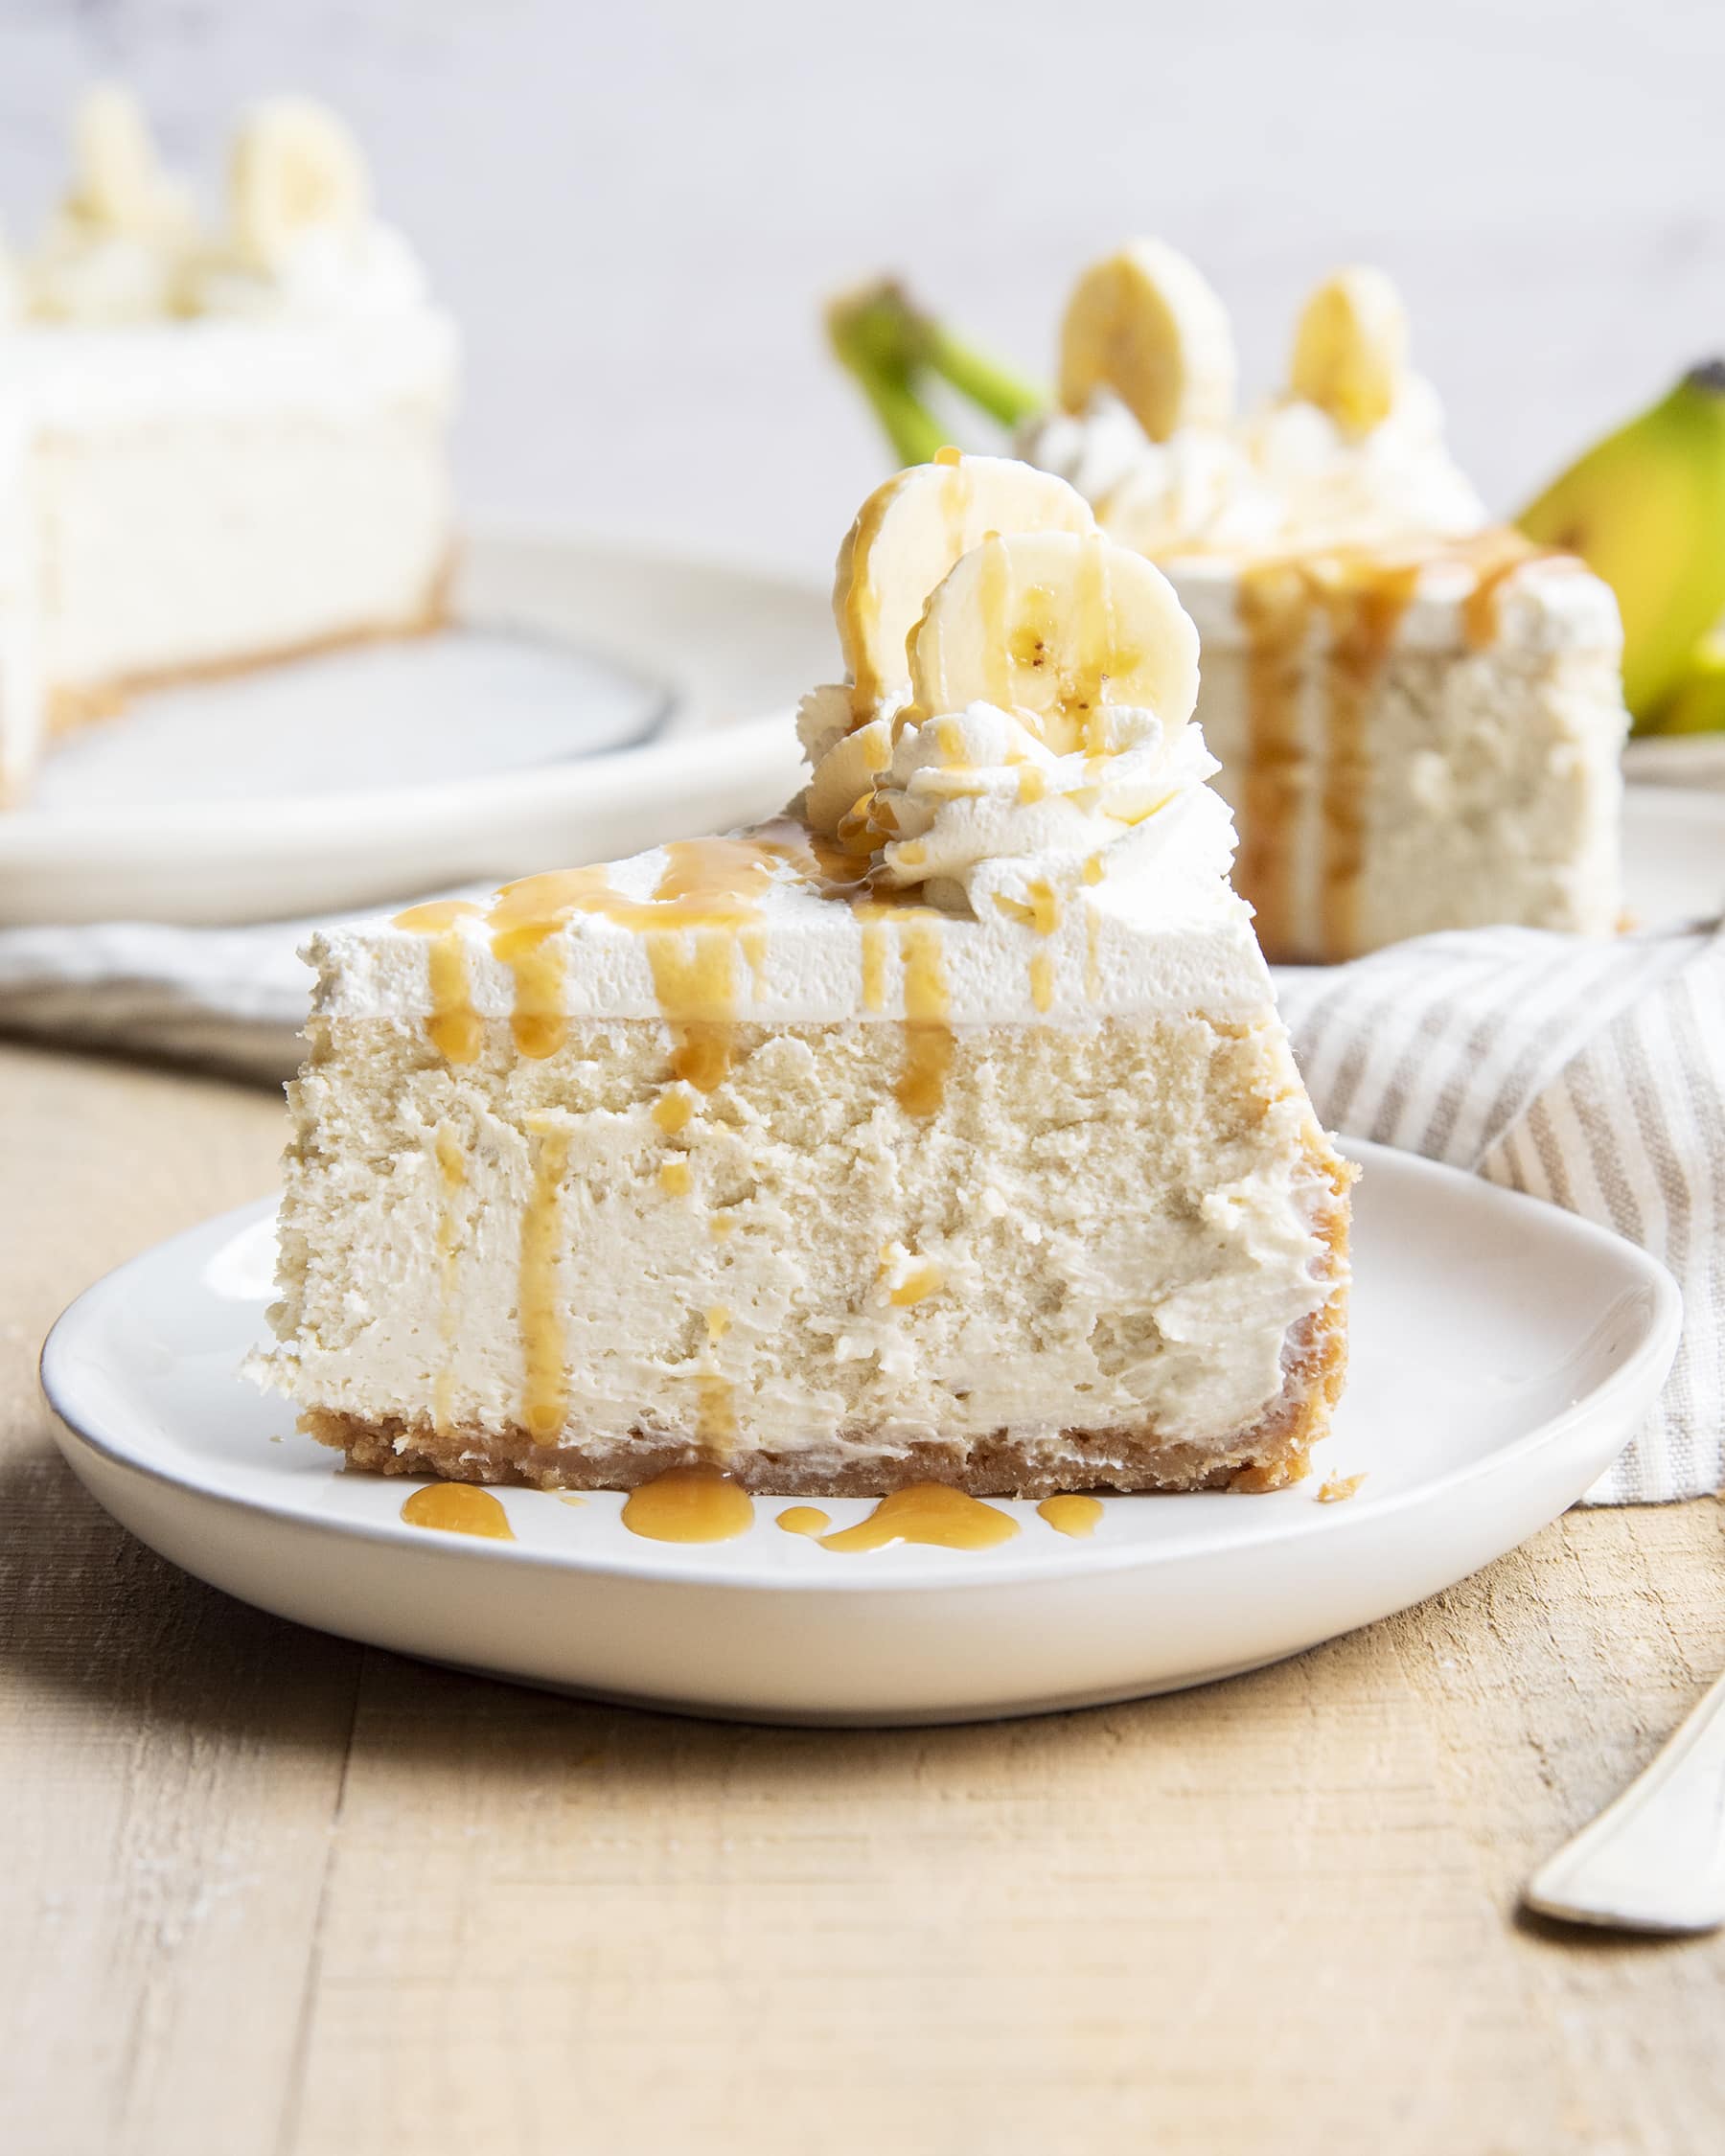 A side view of a slice of banana cheesecake with whipped cream and caramel syrup on top.